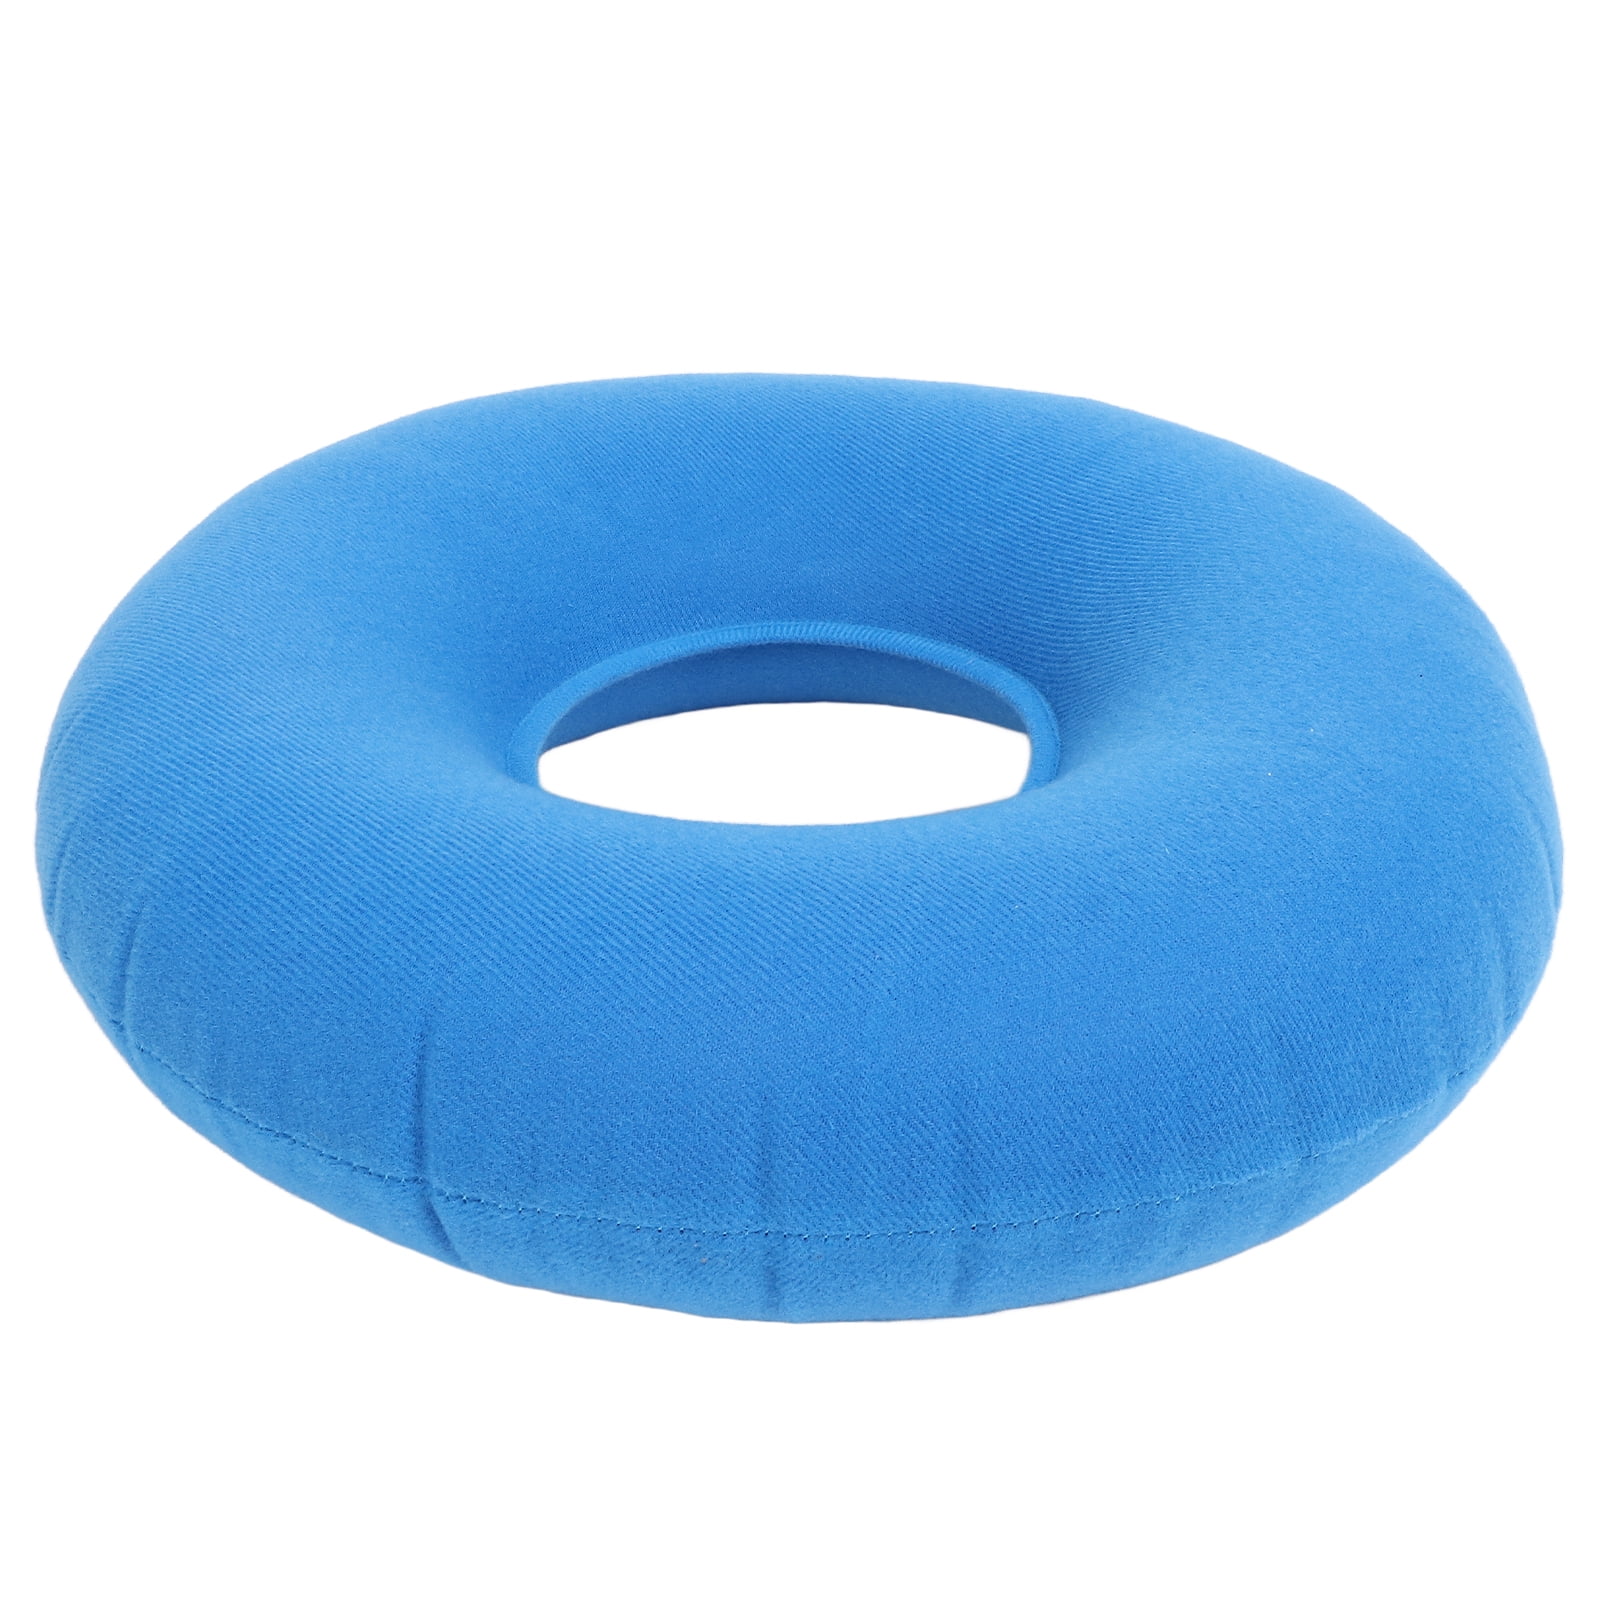 FOMIYES Donut Pillow Seat Cushion Inflatable Bed Sore Cushion